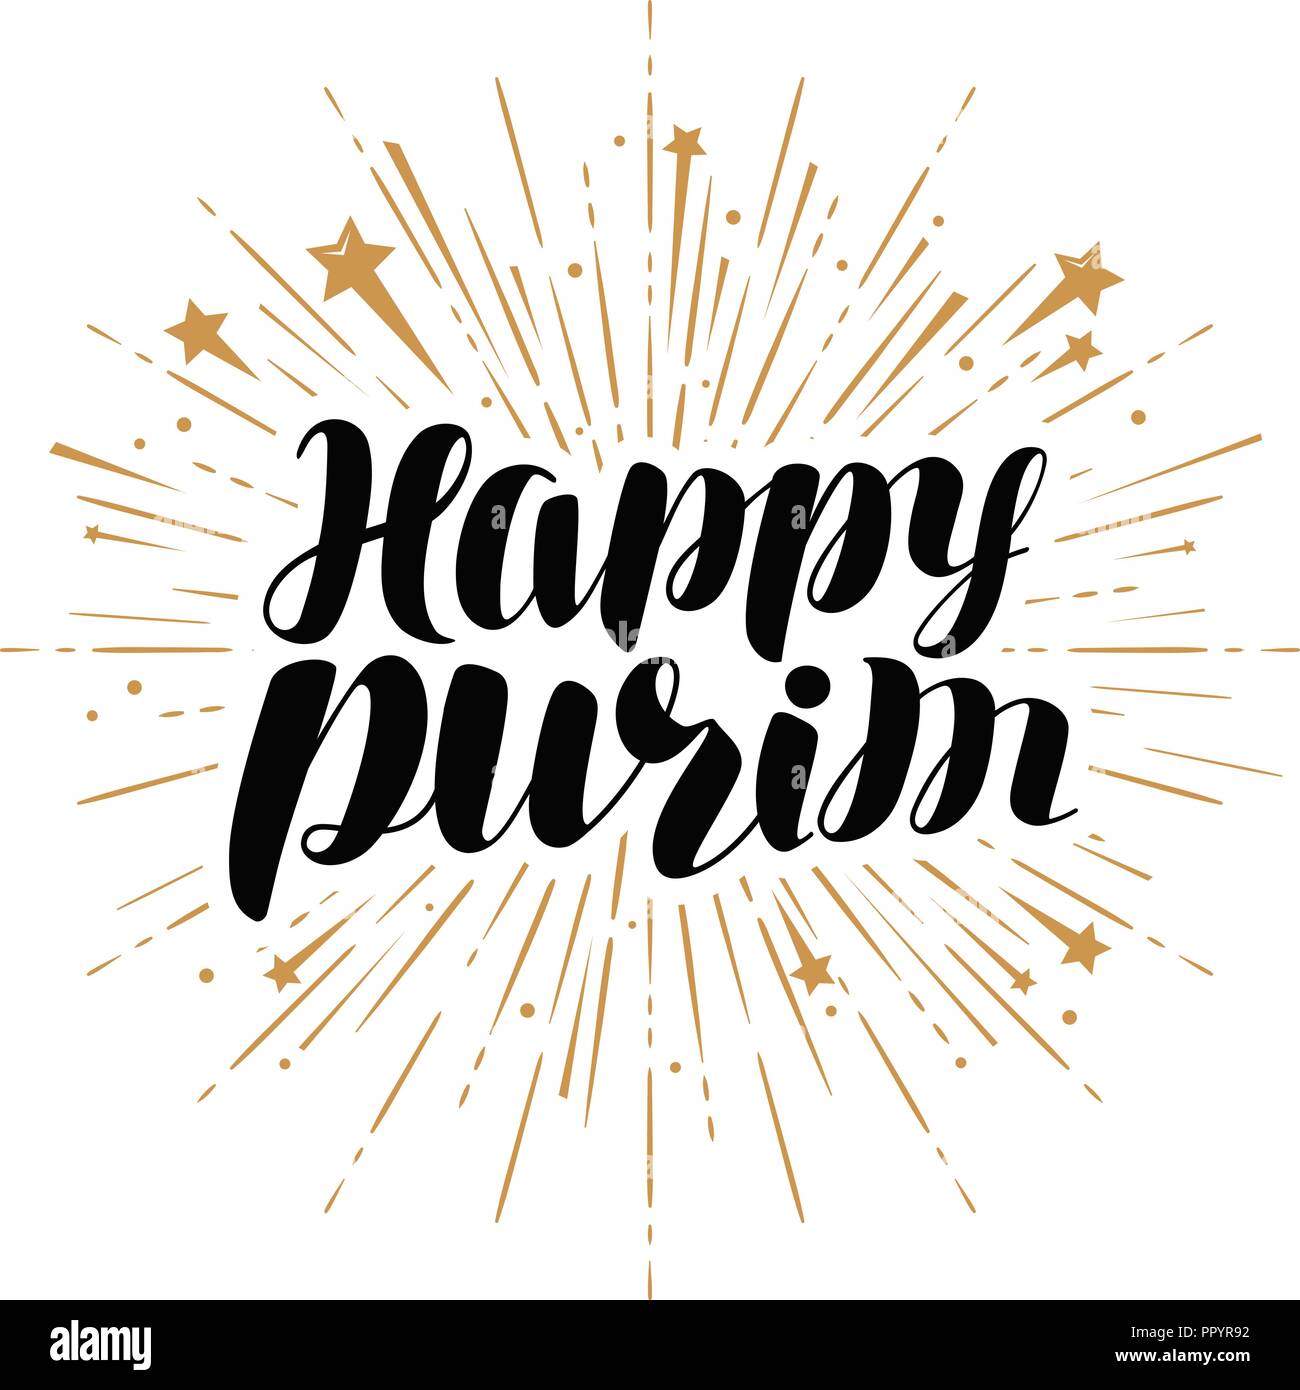 Happy Purim greeting card or banner. Jewish holiday, handwritten lettering vector Stock Vector